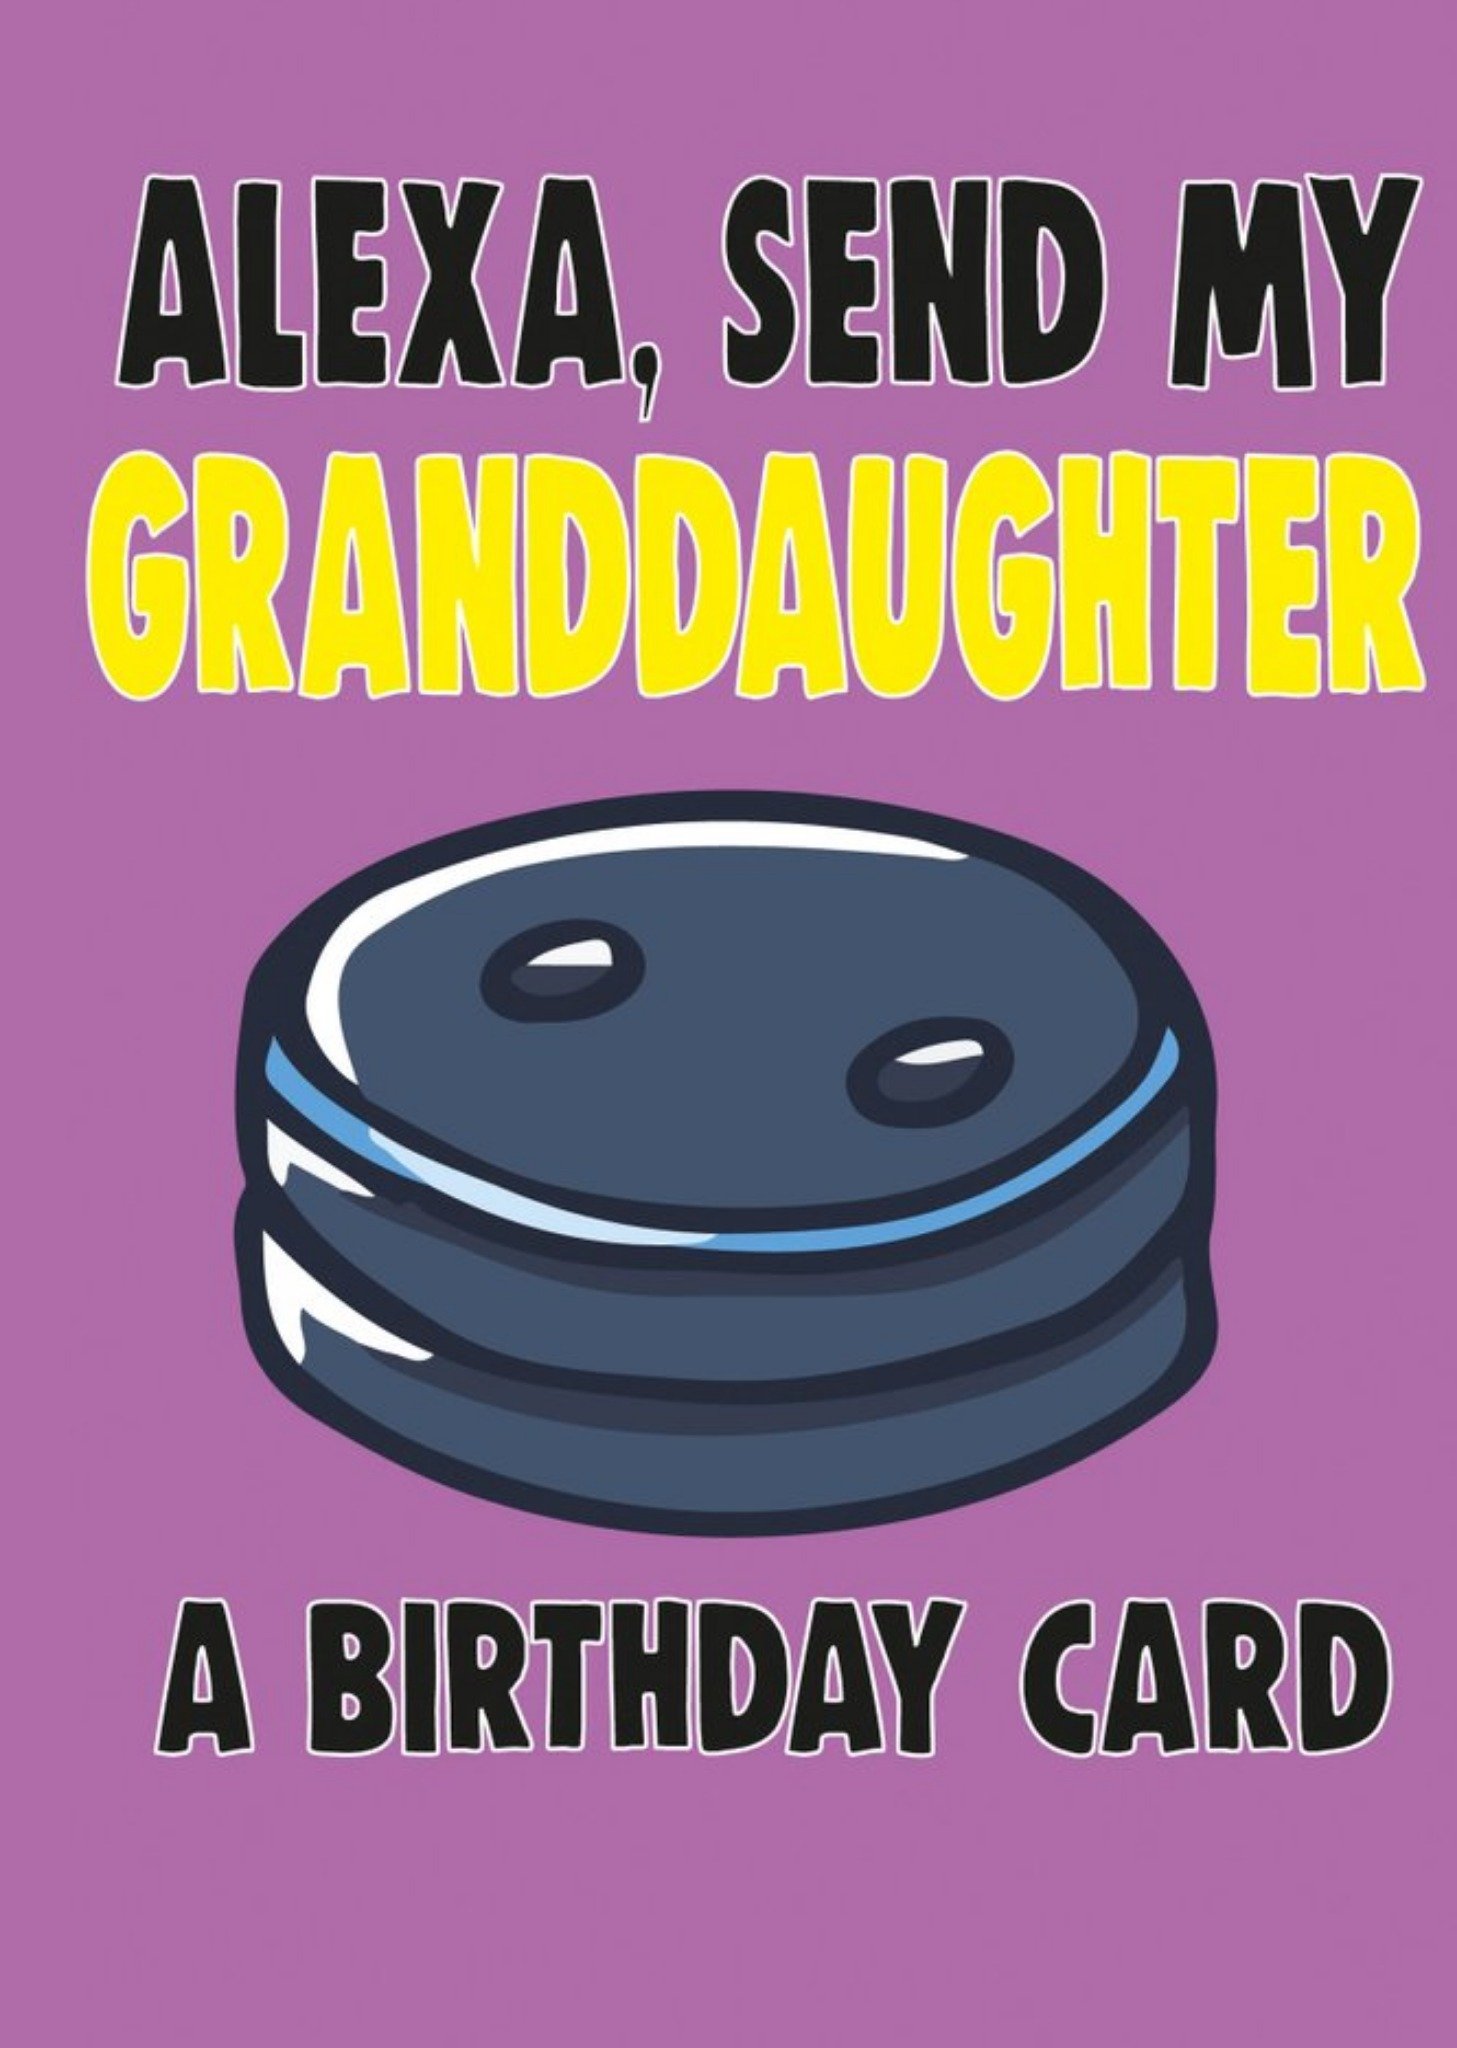 Moonpig Bright Bold Typography With An Illustration Of Alexa Granddaughter Birthday Card, Large